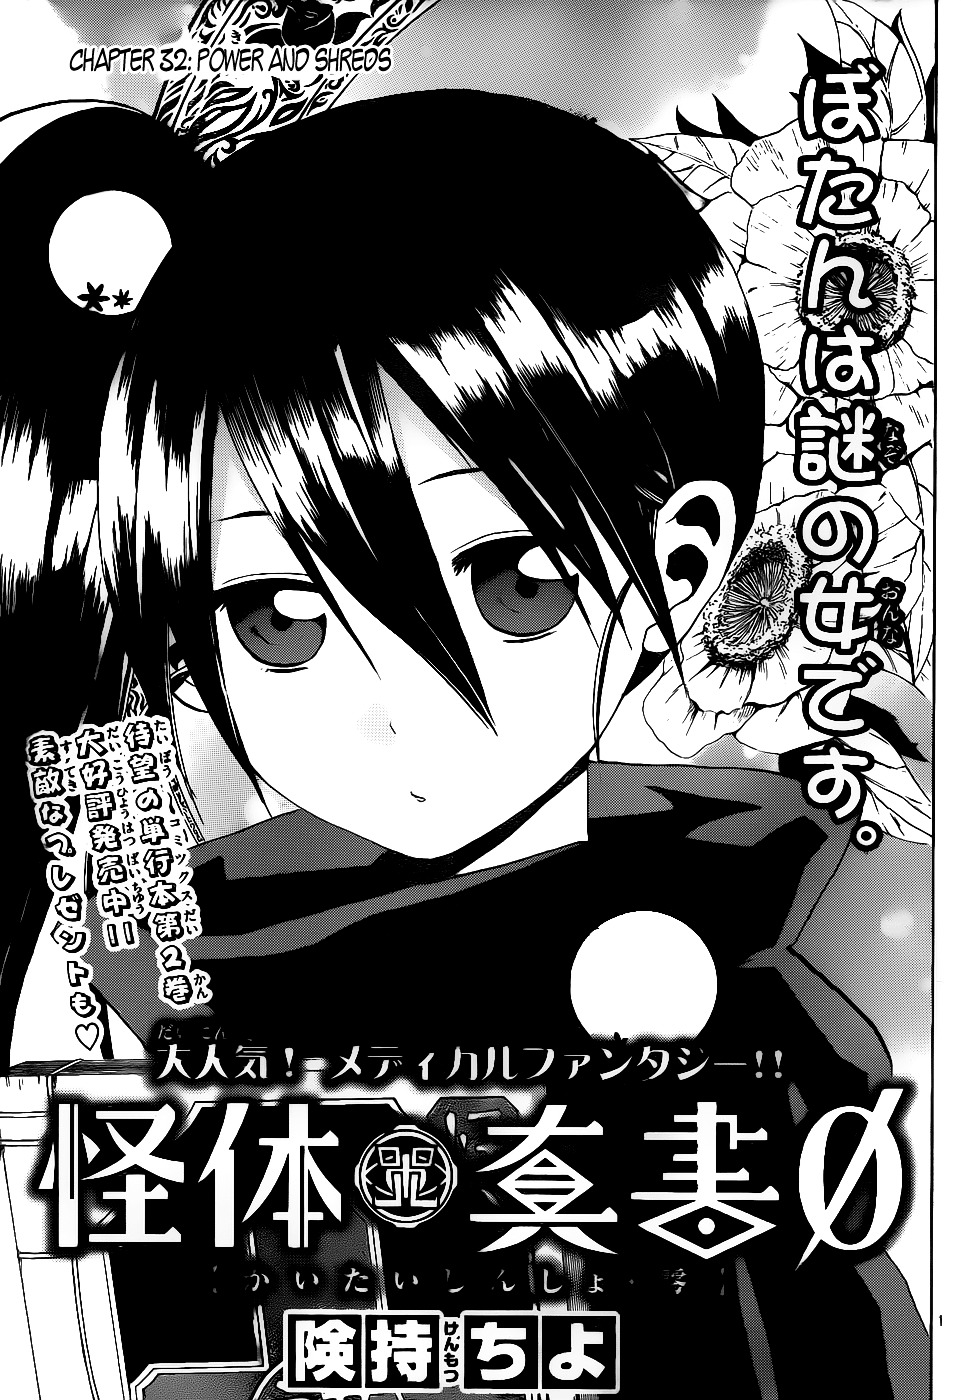 Kaitai Shinsho 0 Chapter 32 : Power And Shreds - Picture 2